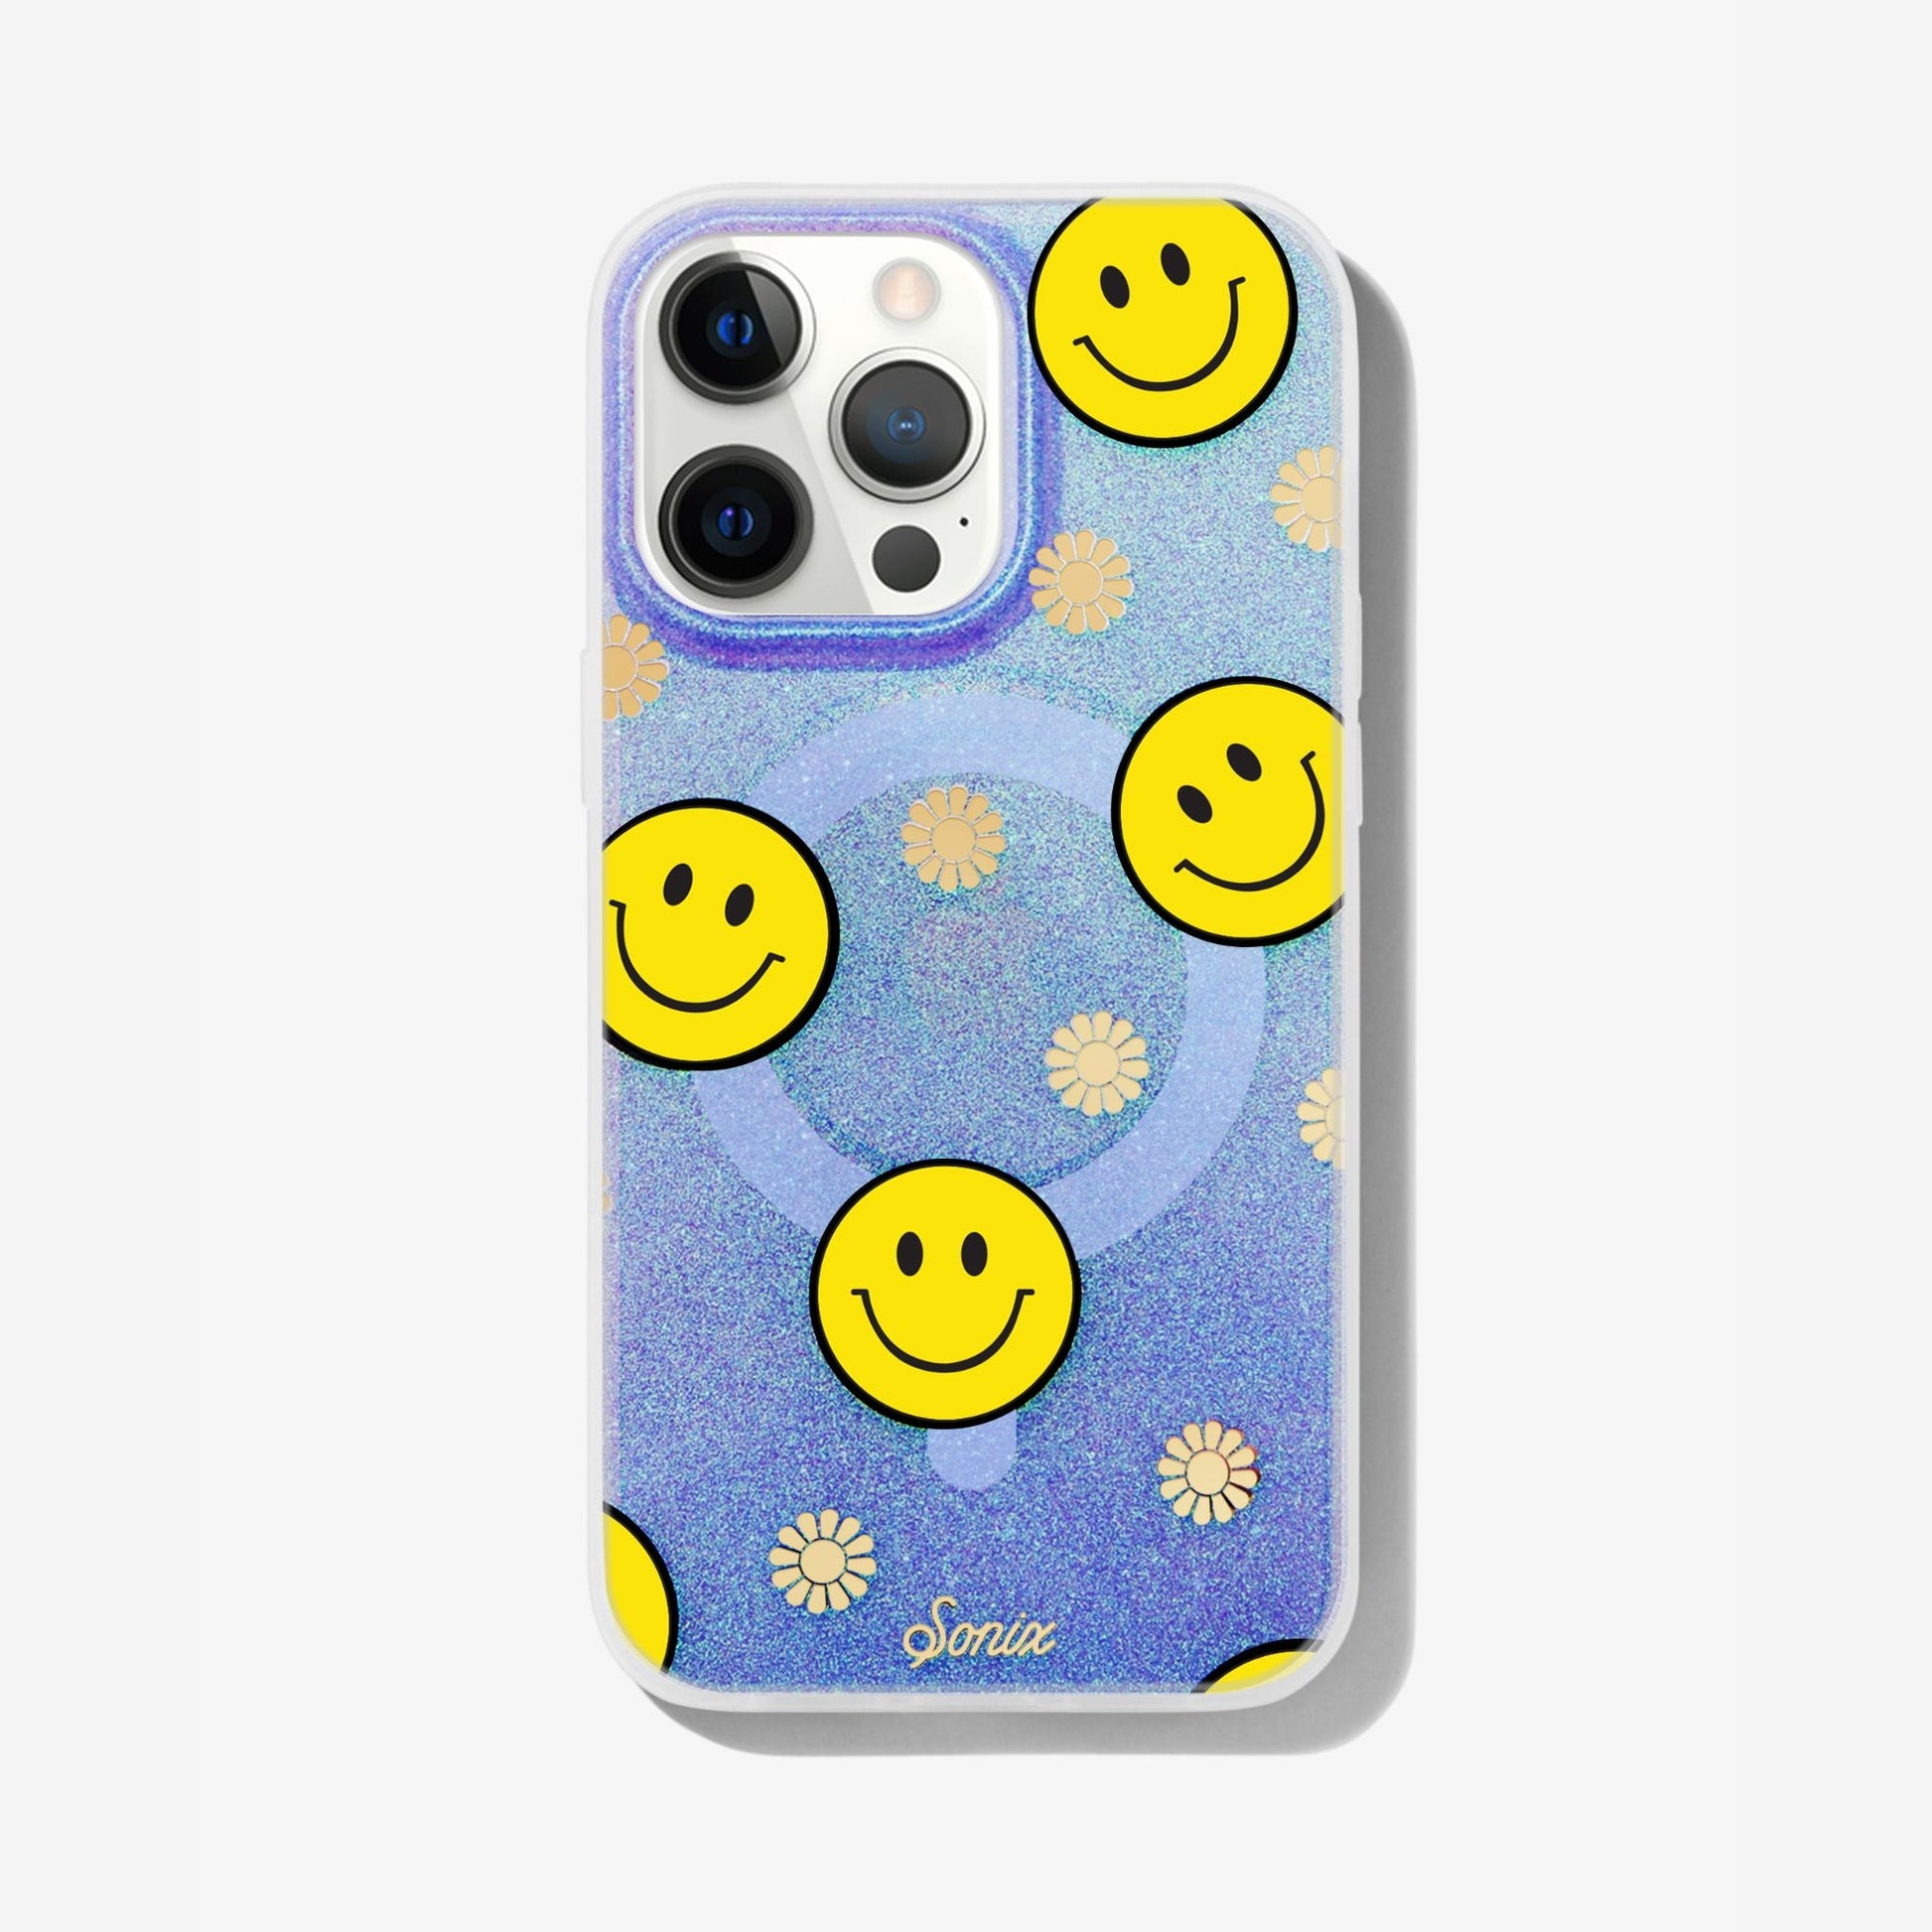 The clear purple case infused with iridescent glitter features happy faces and signature gold foil flowers shown on an iphone 12